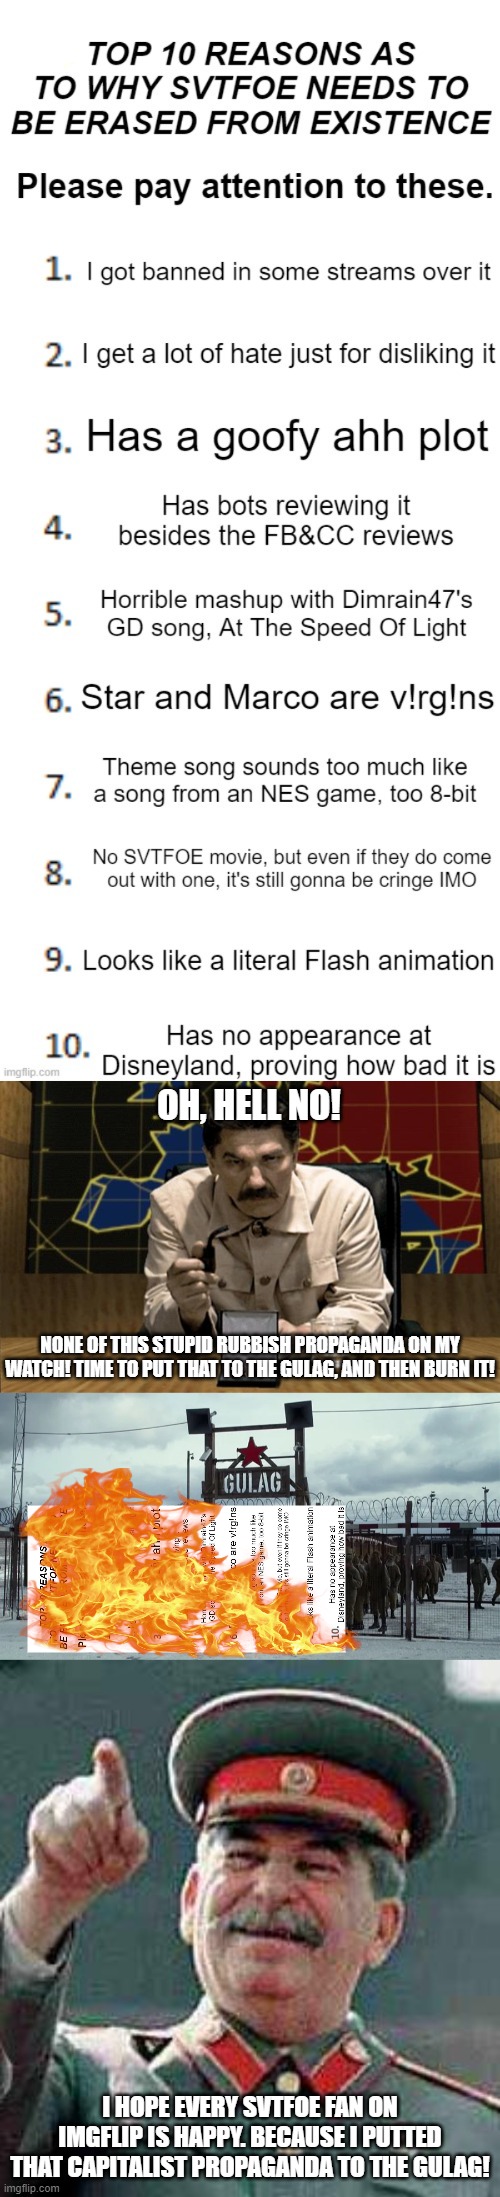 Propaganda Detected | OH, HELL NO! NONE OF THIS STUPID RUBBISH PROPAGANDA ON MY WATCH! TIME TO PUT THAT TO THE GULAG, AND THEN BURN IT! I HOPE EVERY SVTFOE FAN ON IMGFLIP IS HAPPY. BECAUSE I PUTTED THAT CAPITALIST PROPAGANDA TO THE GULAG! | image tagged in joseph stalin,stalin,gulag | made w/ Imgflip meme maker